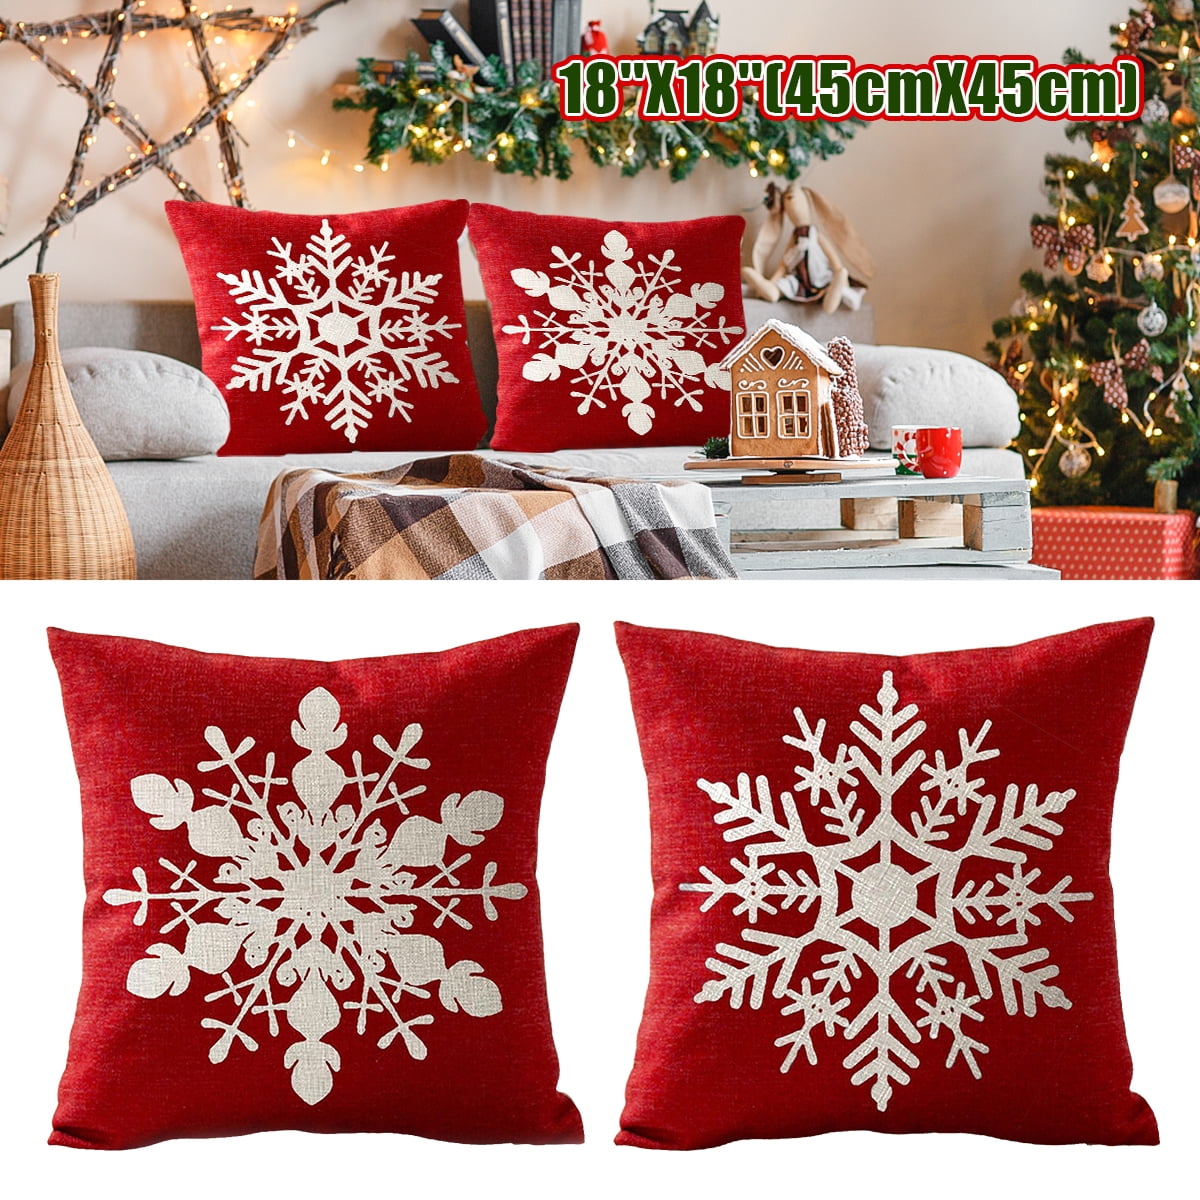 4PCS Christmas Pillow Covers Snowman Printing Pillowcases Square 18x18inch US 